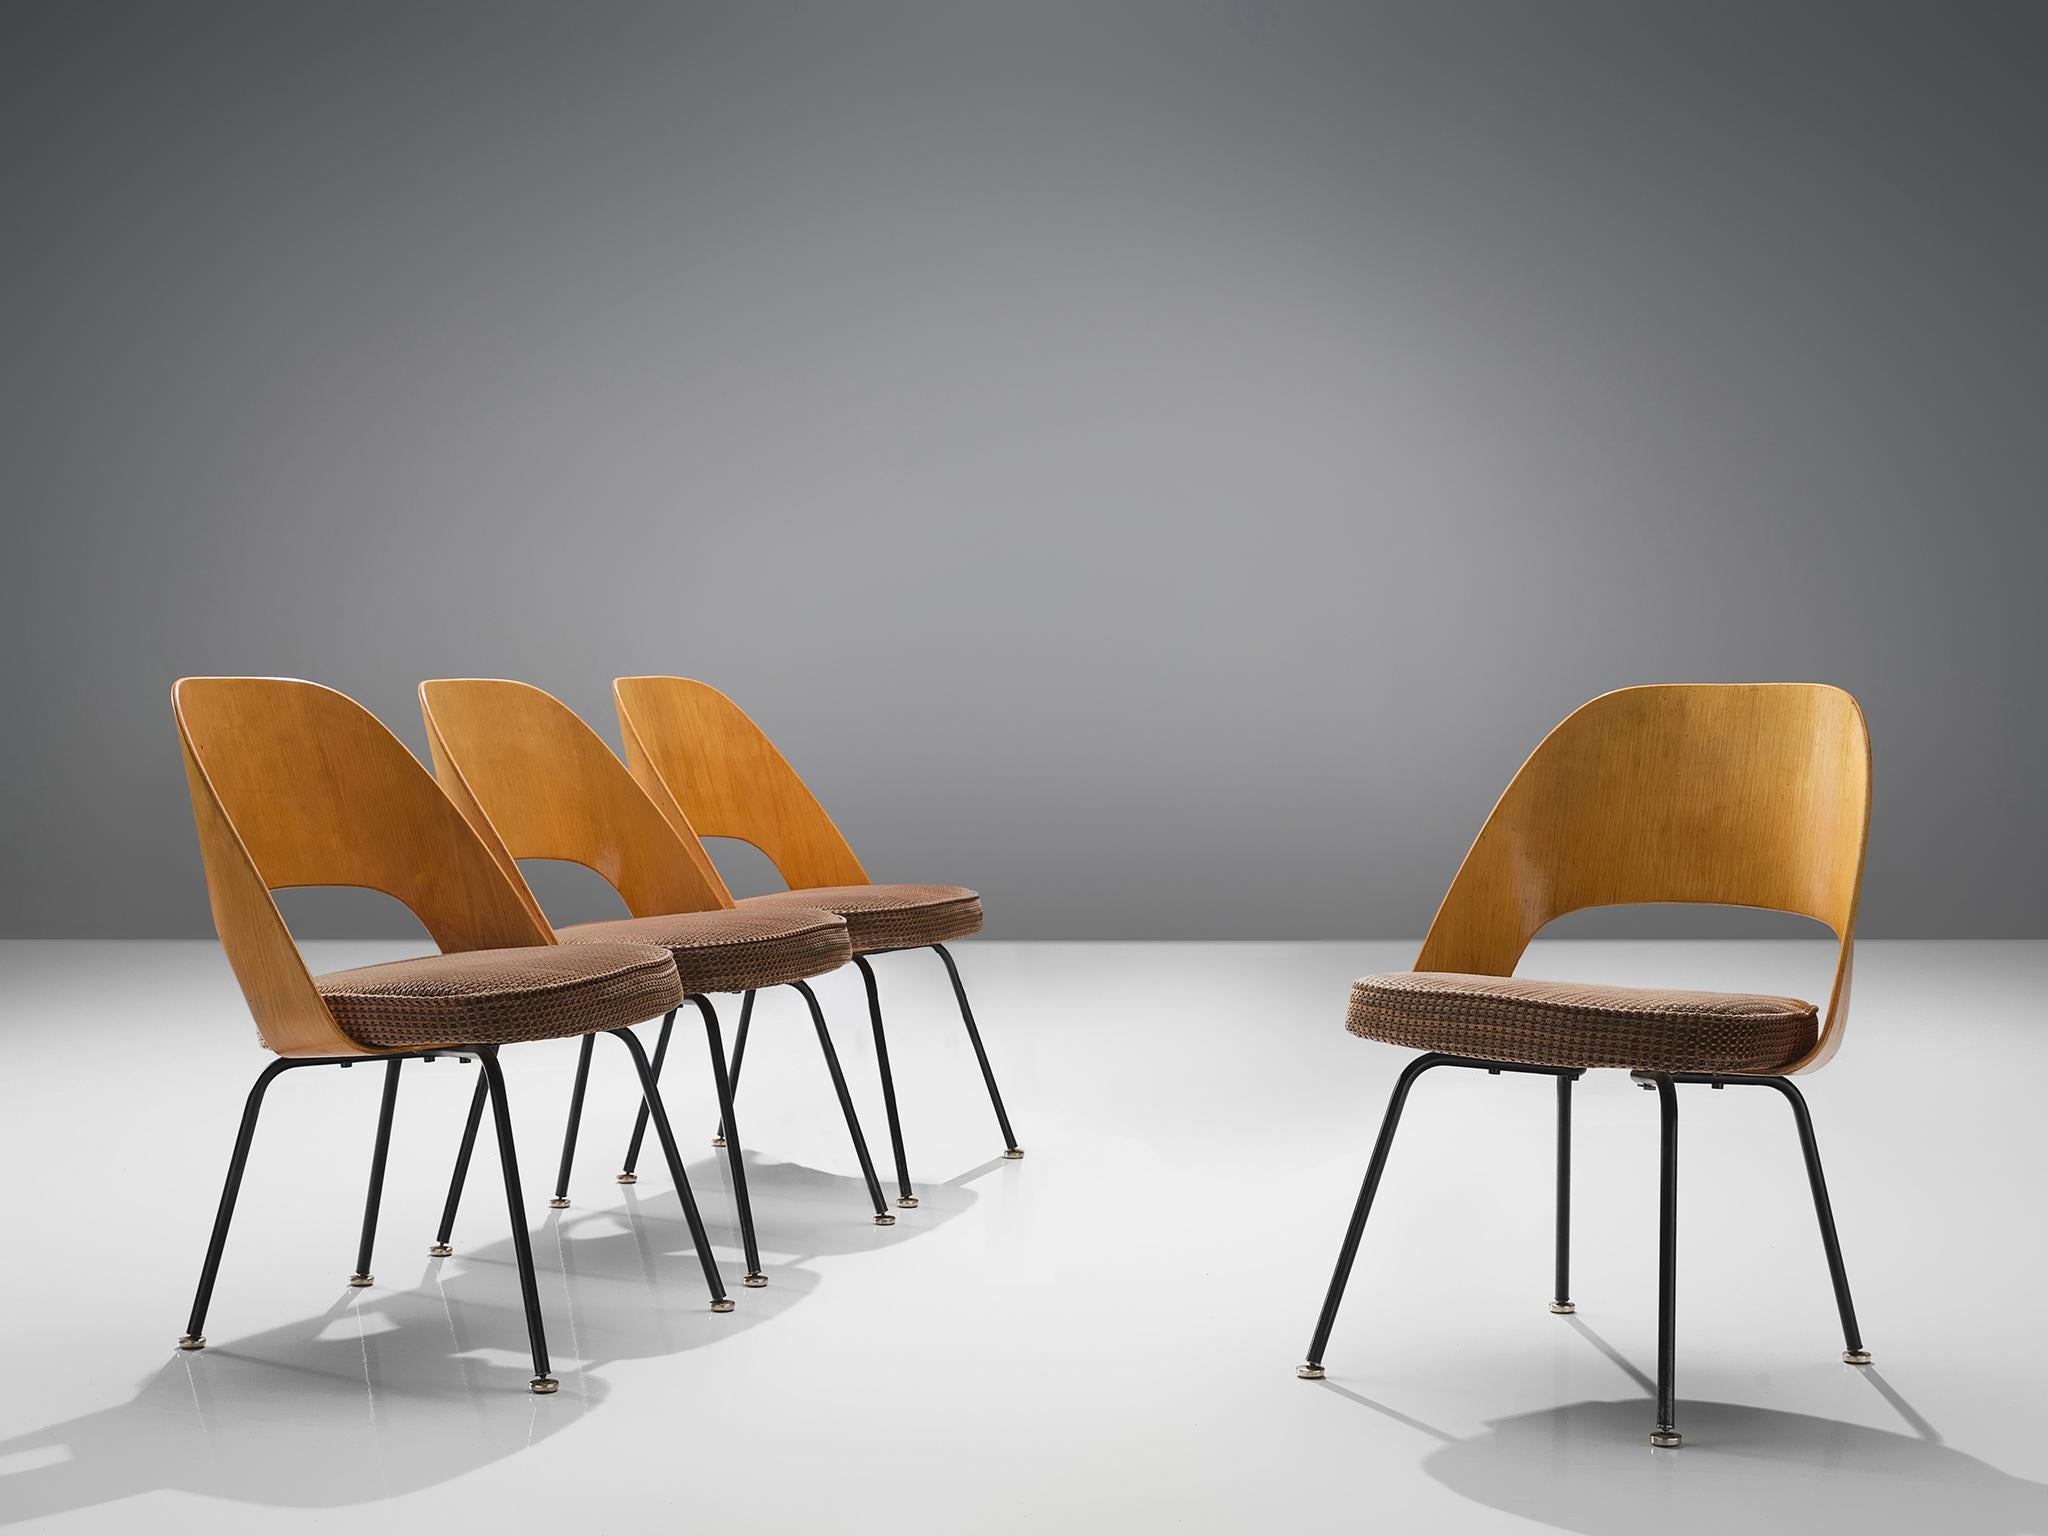 Eero Saarinen for Knoll International, set of four dining chairs, coated iron, plywood, velvet, United States / Belgium, design 1948, production 1960s

Four organic shaped chairs designed by Eero Saarinen. This iconic model features a plywood back